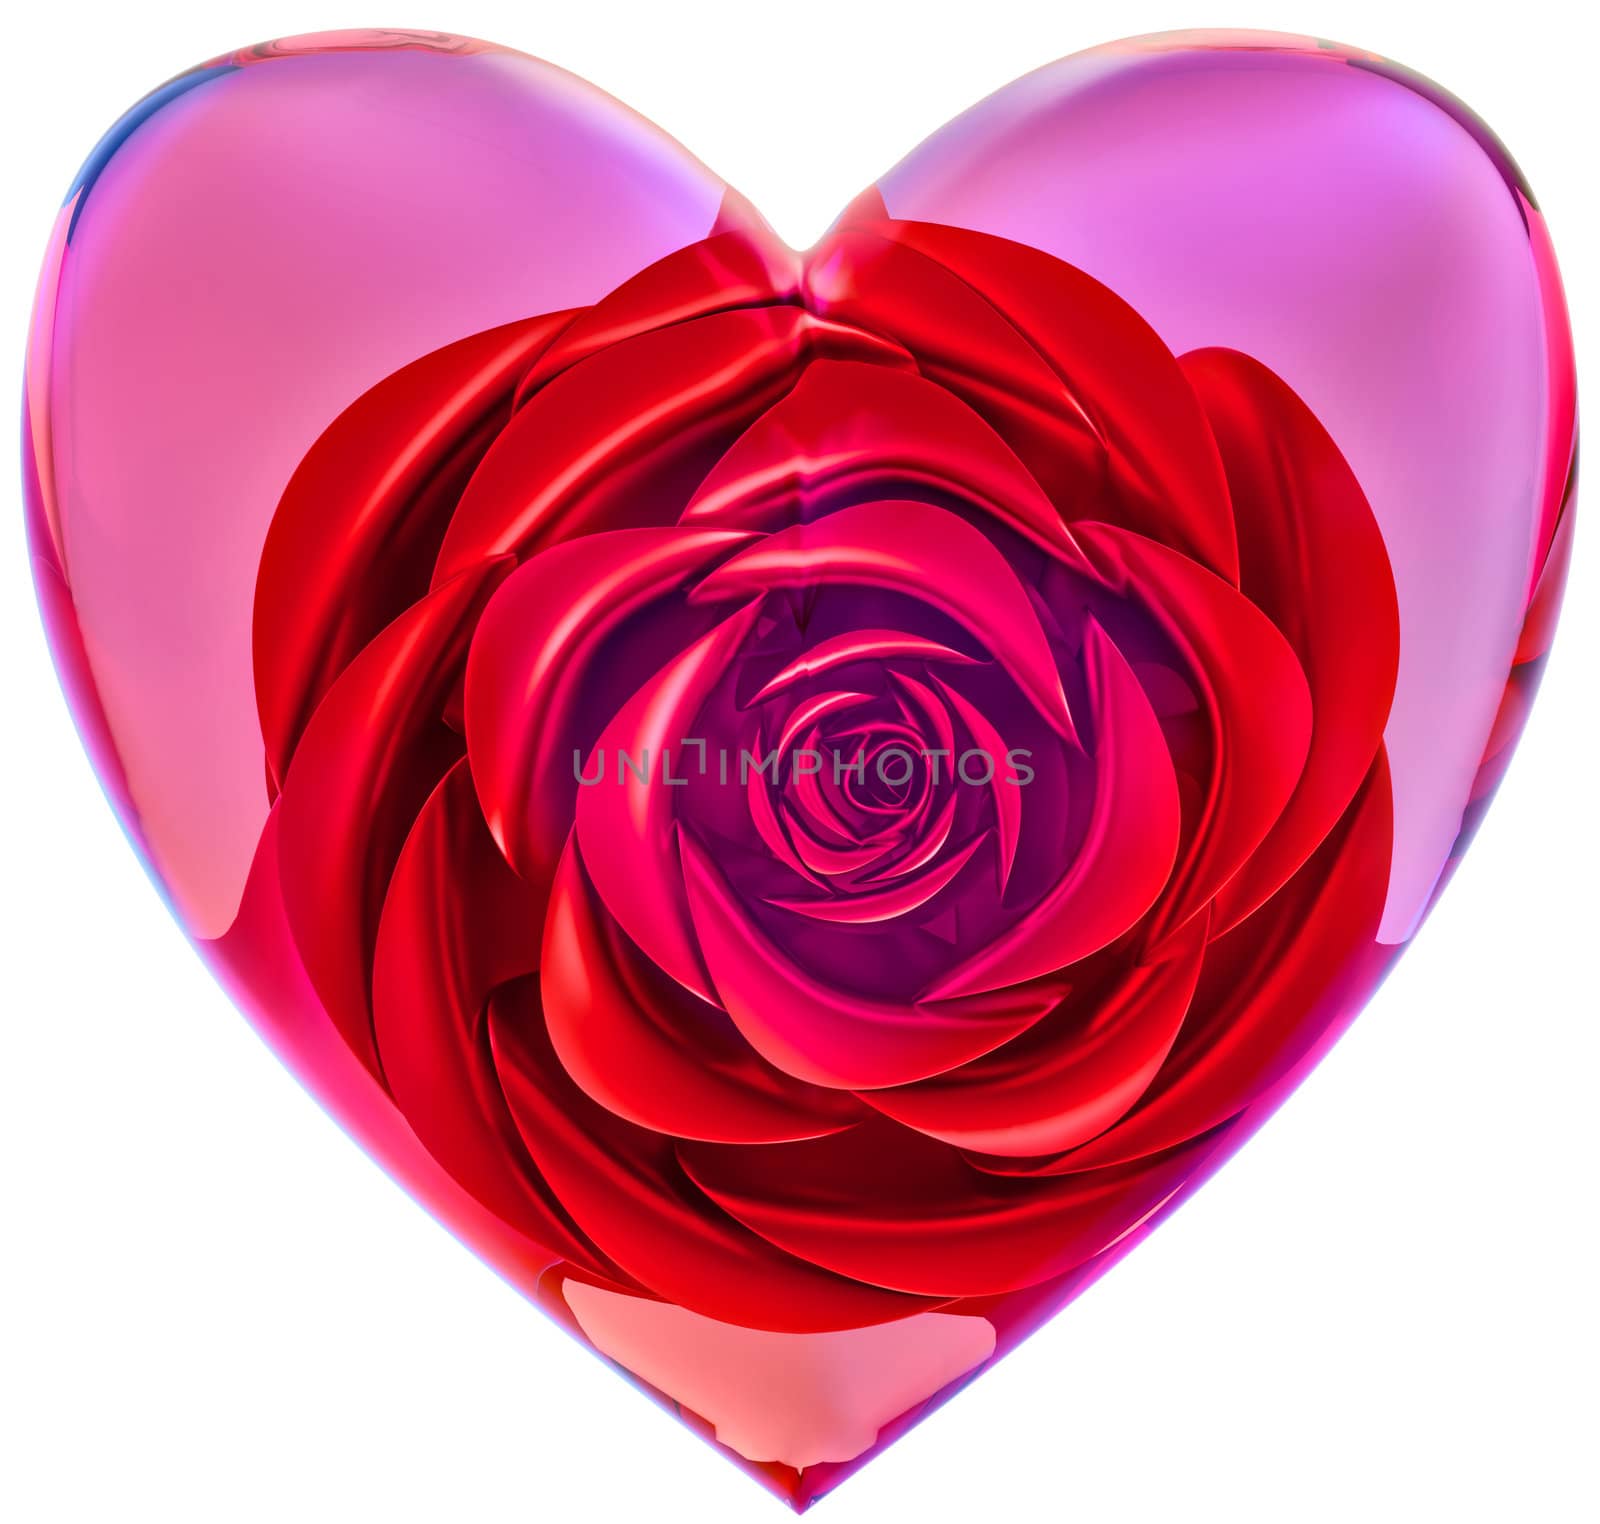 beautiful red rose in glass heart as decoration for celebration of Valentine's Day